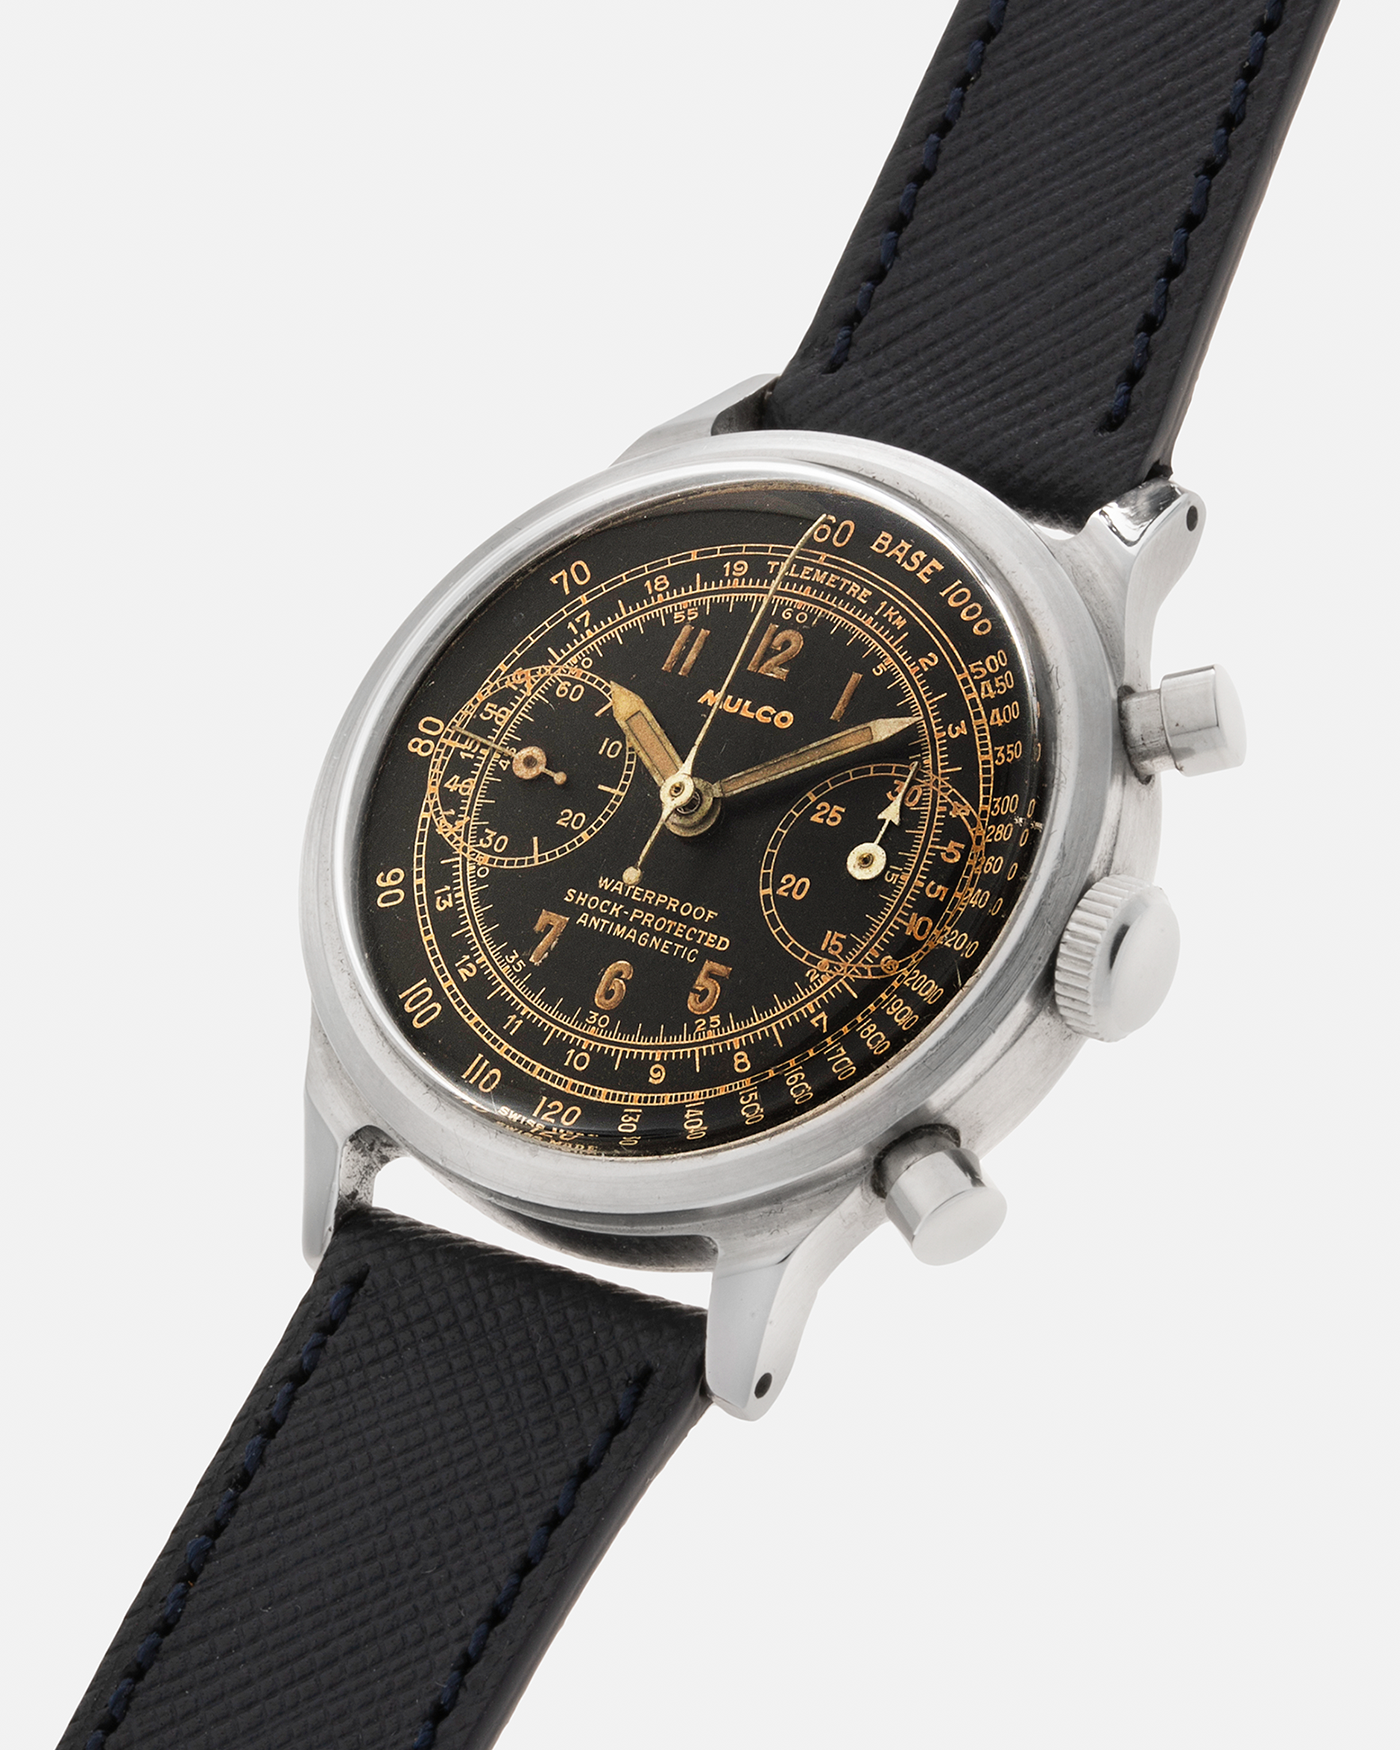 Brand: Mulco Year: 1940s Material: Stainless Steel Movement: Valjoux Cal. 22, Manual-Winding Case Diameter: 38mm (Spillman Case) Lug Width: 19mm Strap: Molequin Navy Textured Calf Leather Strap